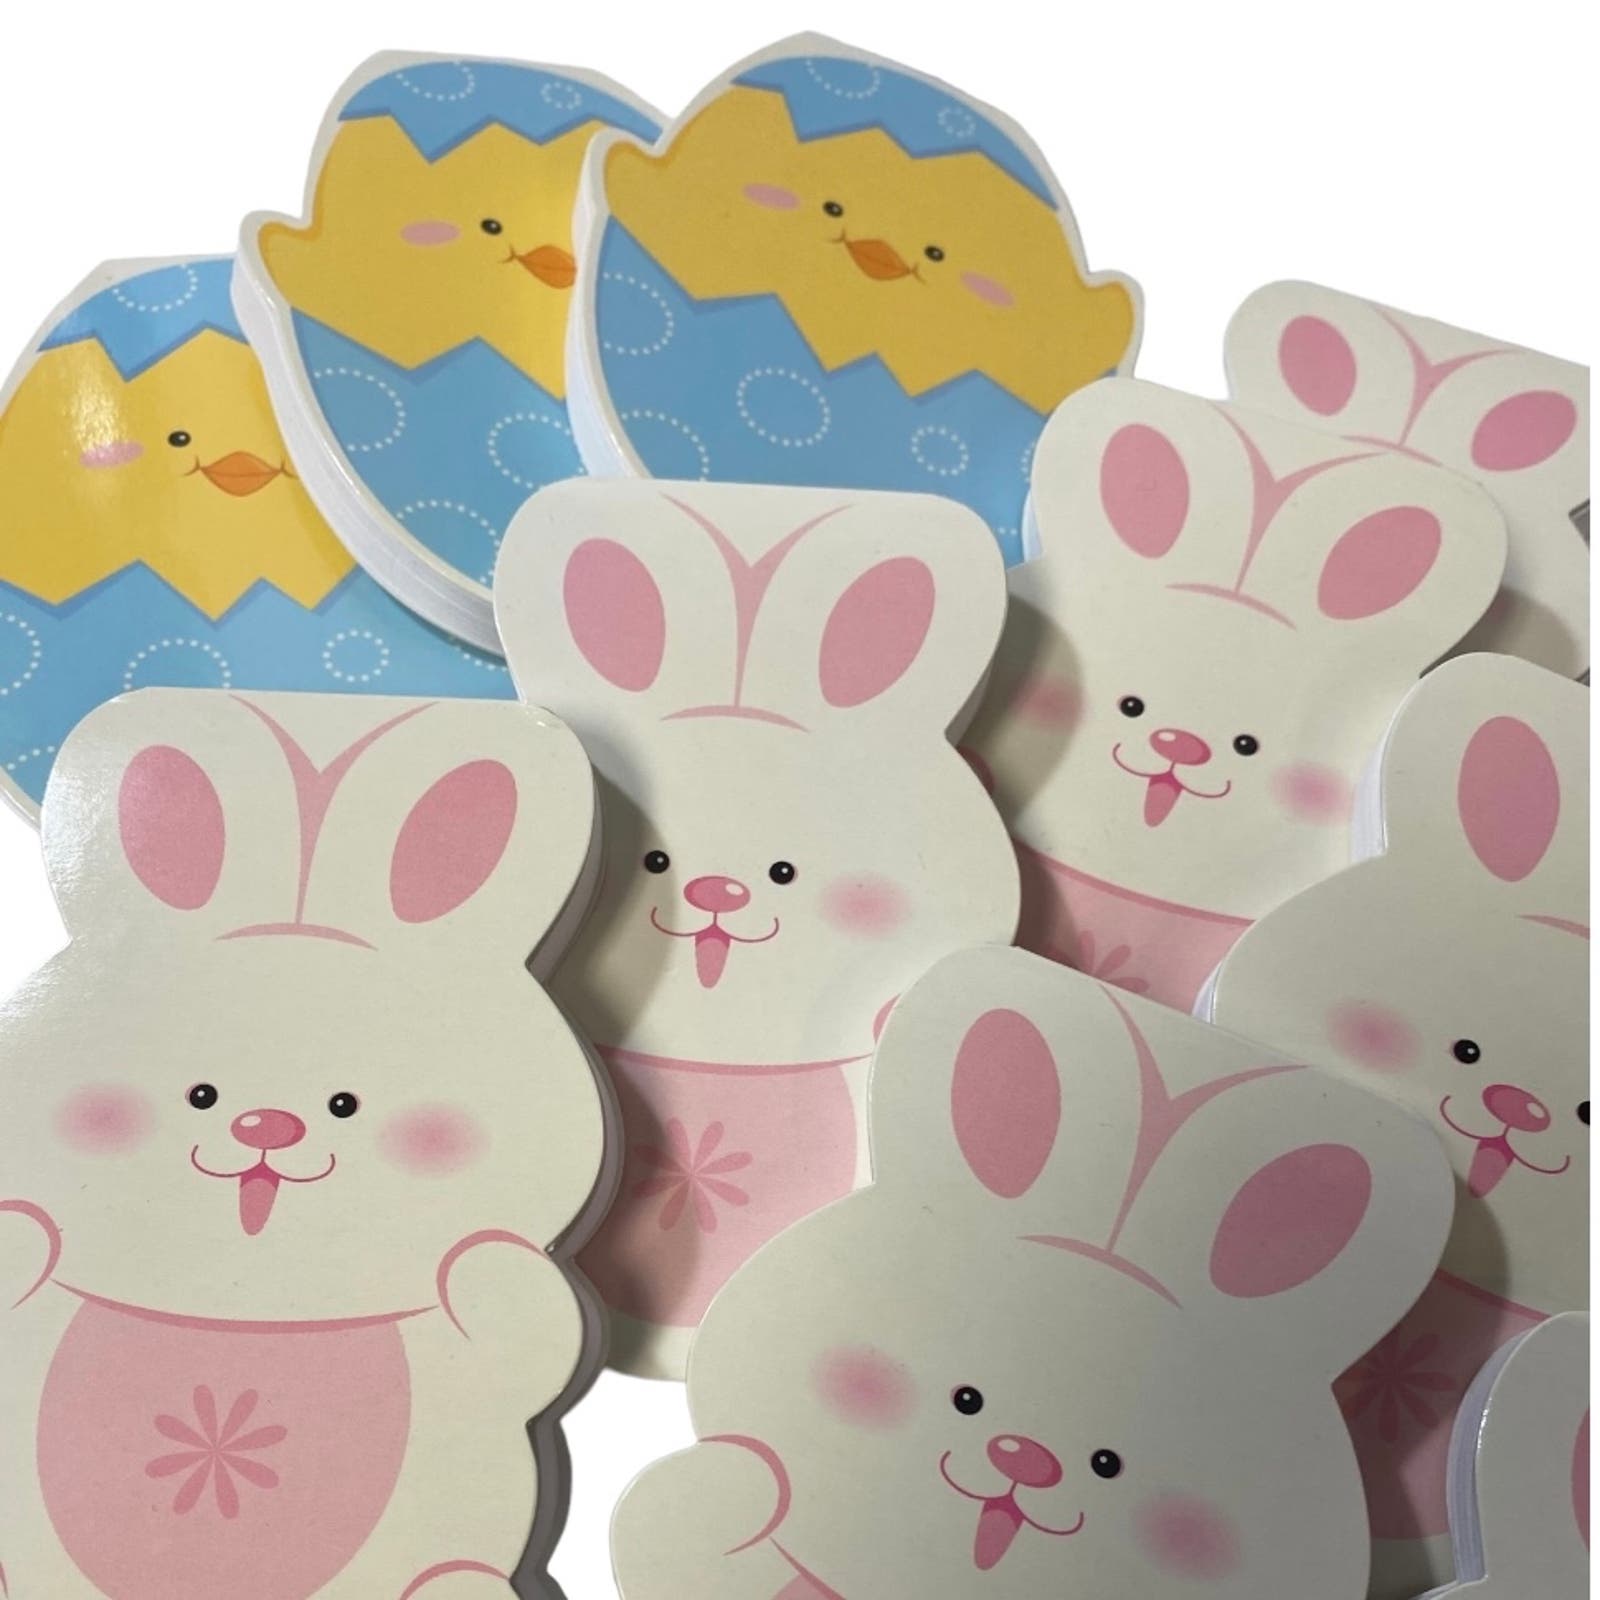 Scribble Note Pads Set of 13 Easter Bunny Rabbit Chick Kids Party Favors Games